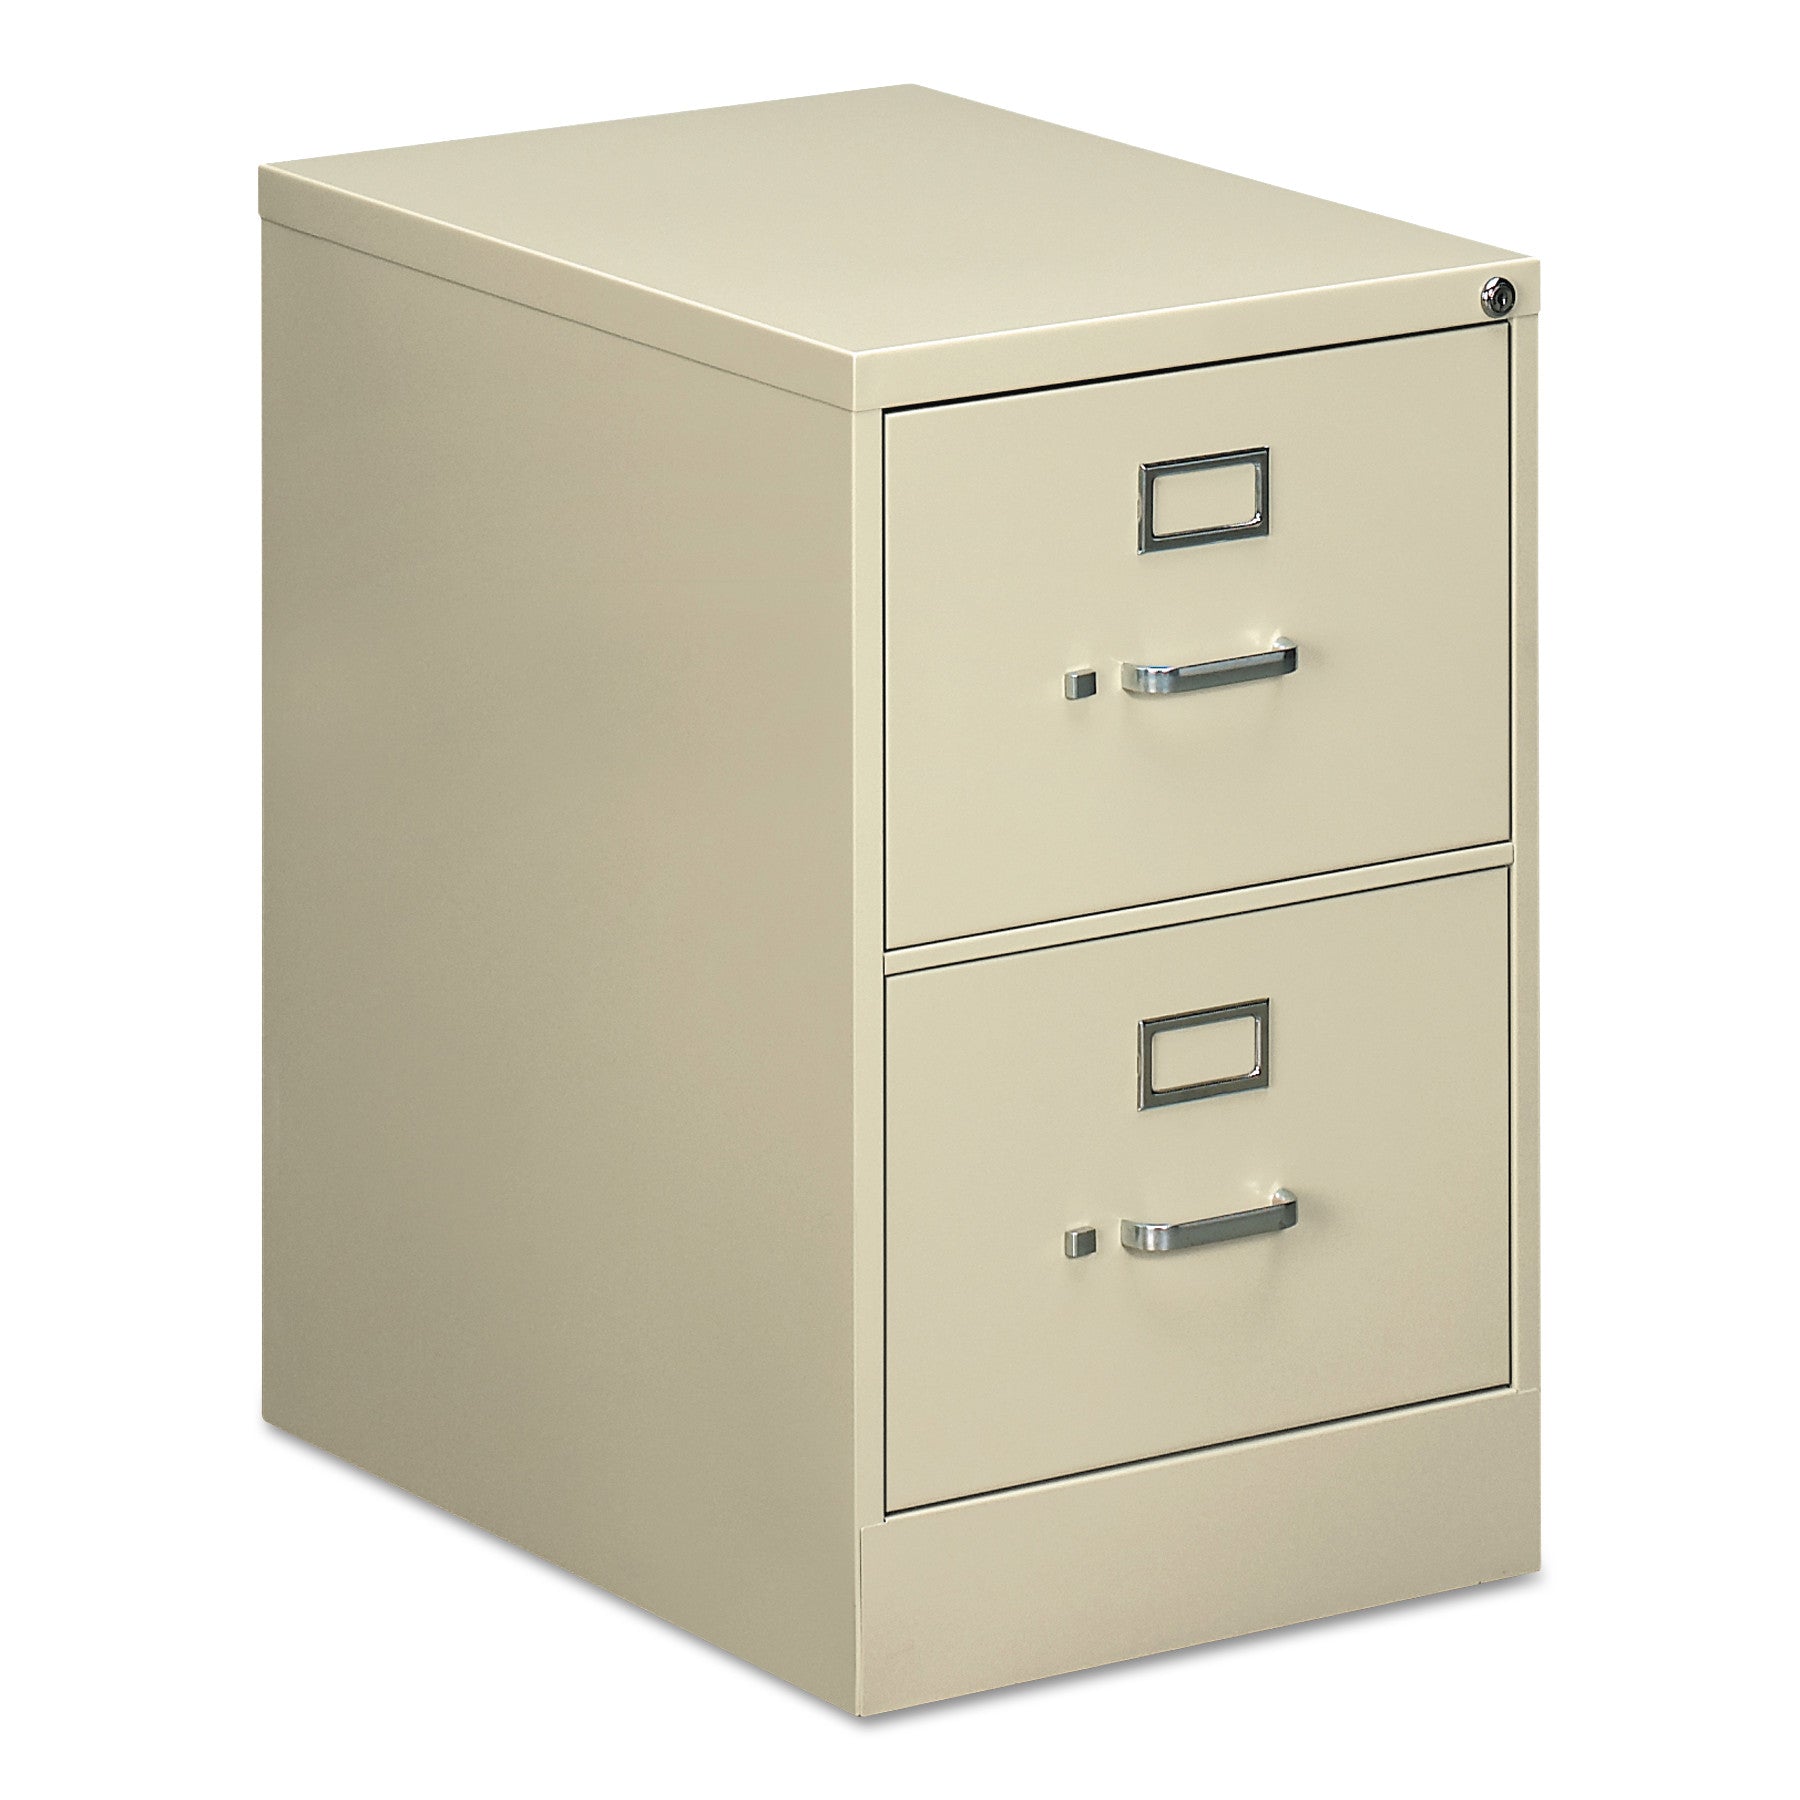 two-drawer-economy-vertical-file-2-legal-size-file-drawers-putty-18-x-25-x-2838_alehvf1929py - 1